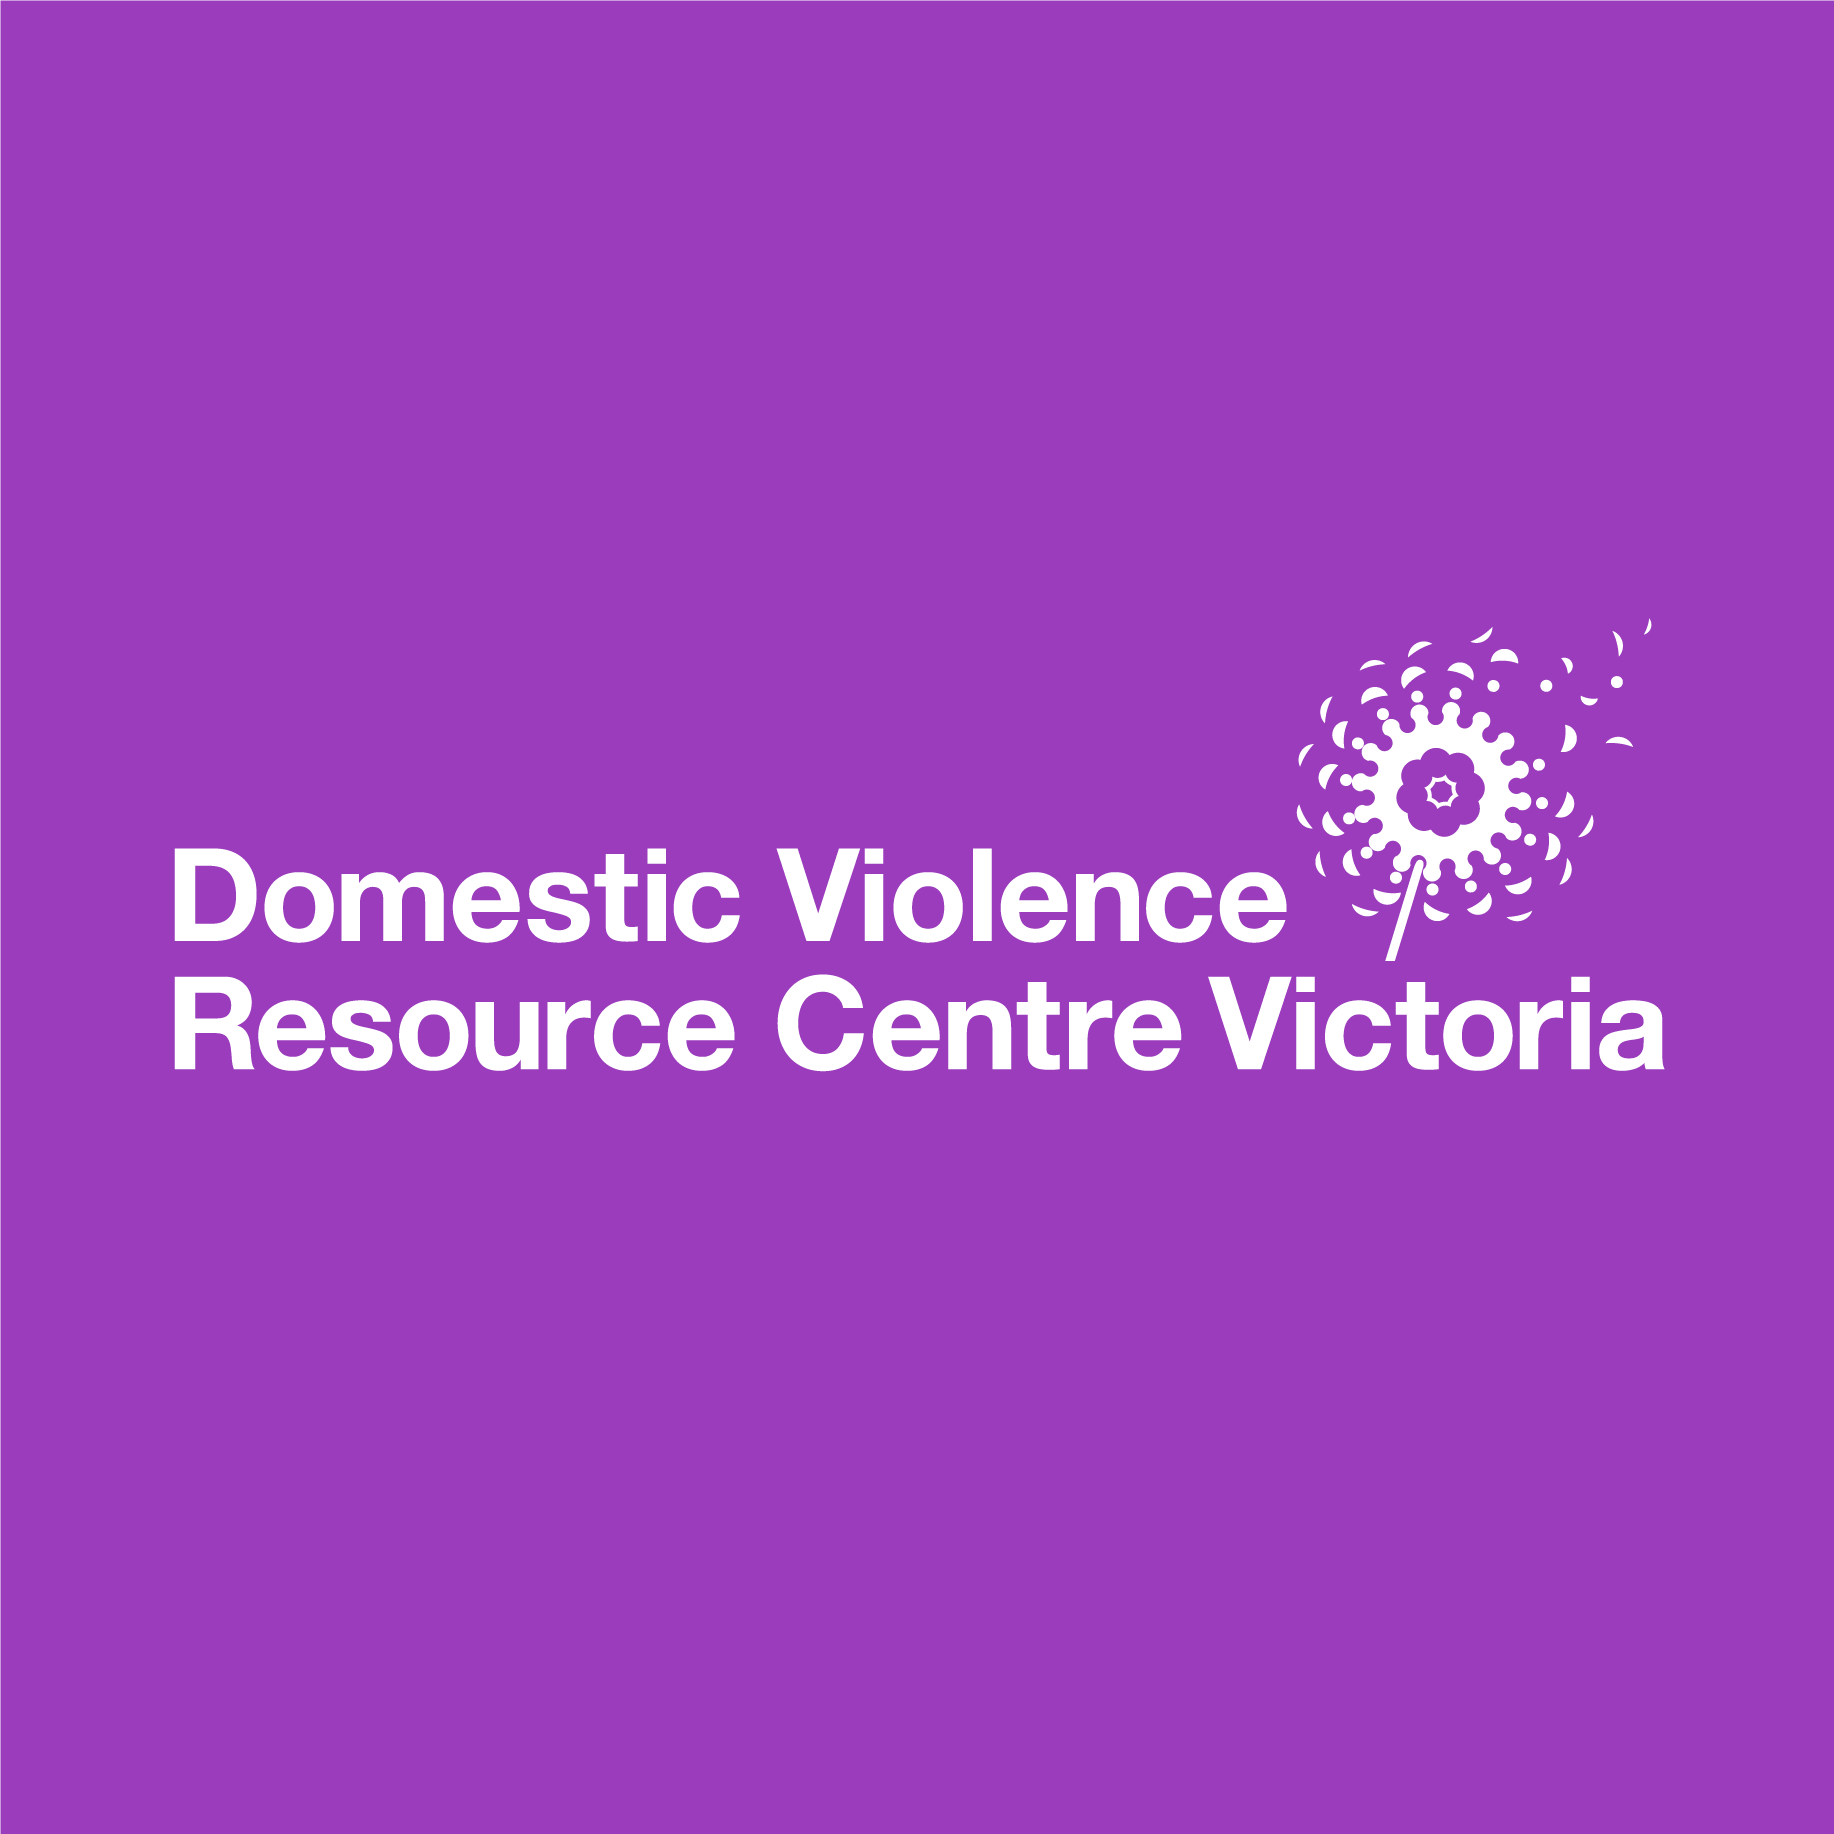 Building cross-sector collaboration to prevent family violence